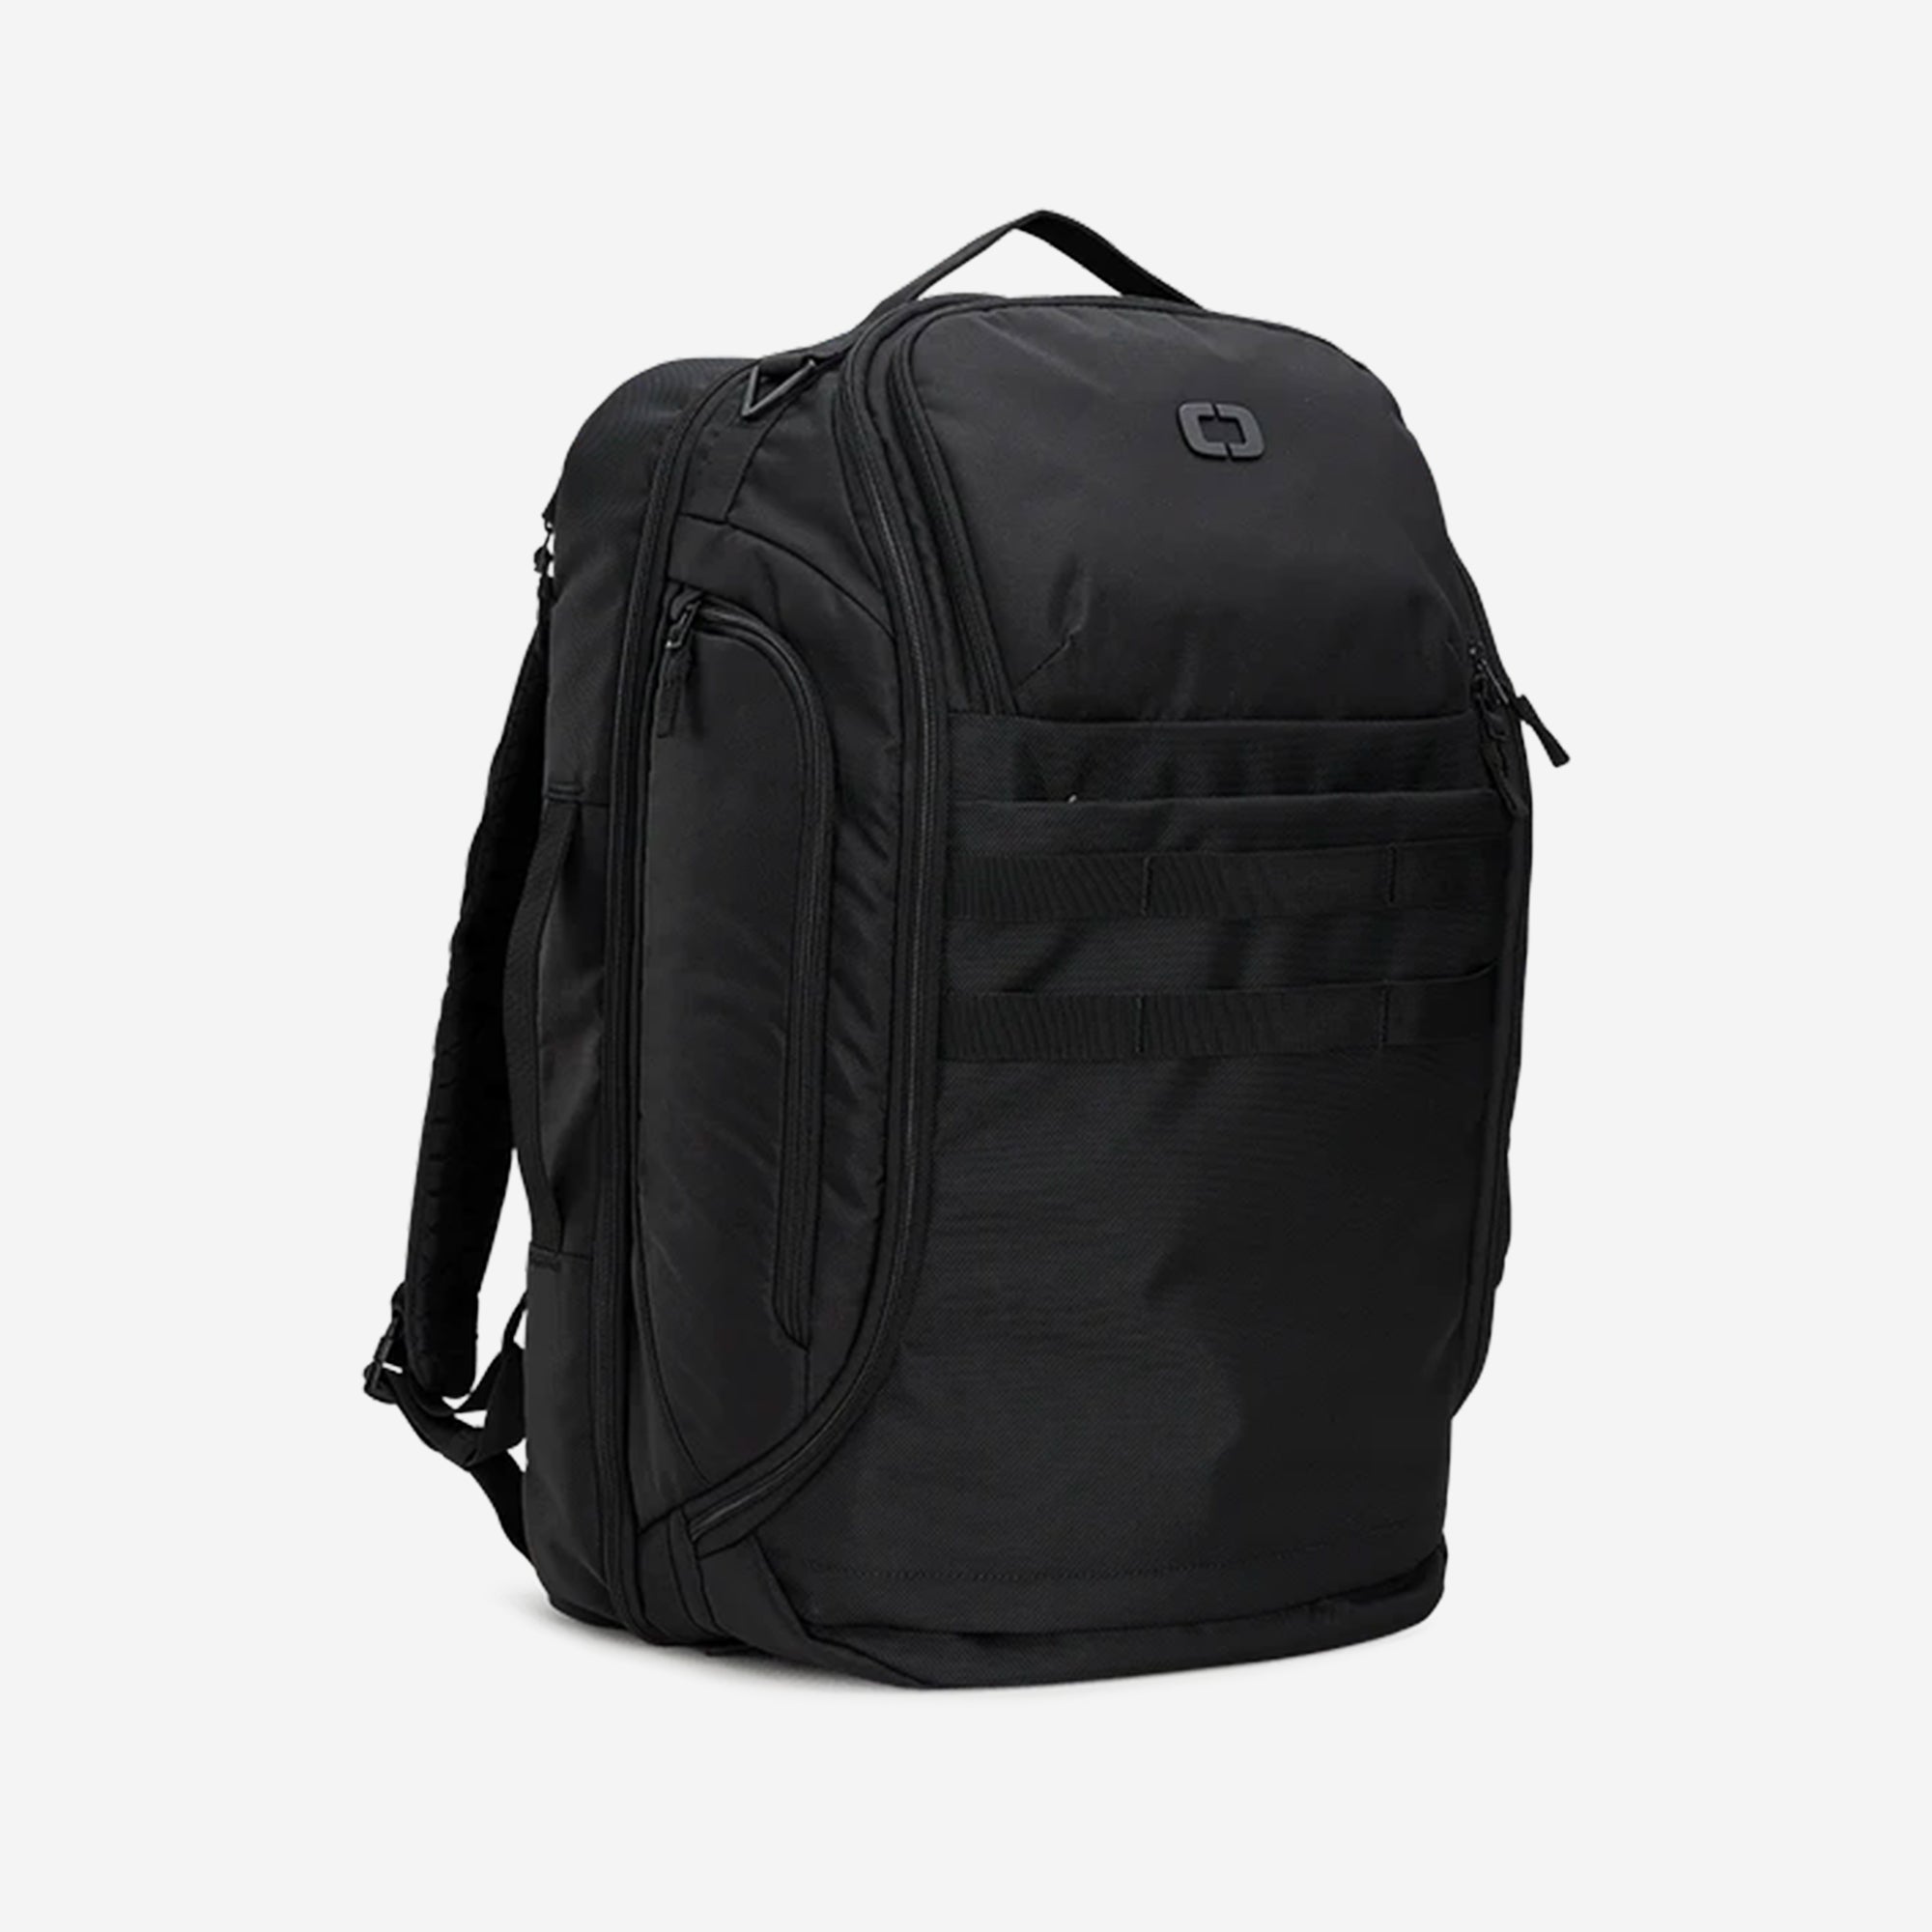 OGIO PACE PRO MAX TRAVEL DUFFEL PACK 45L